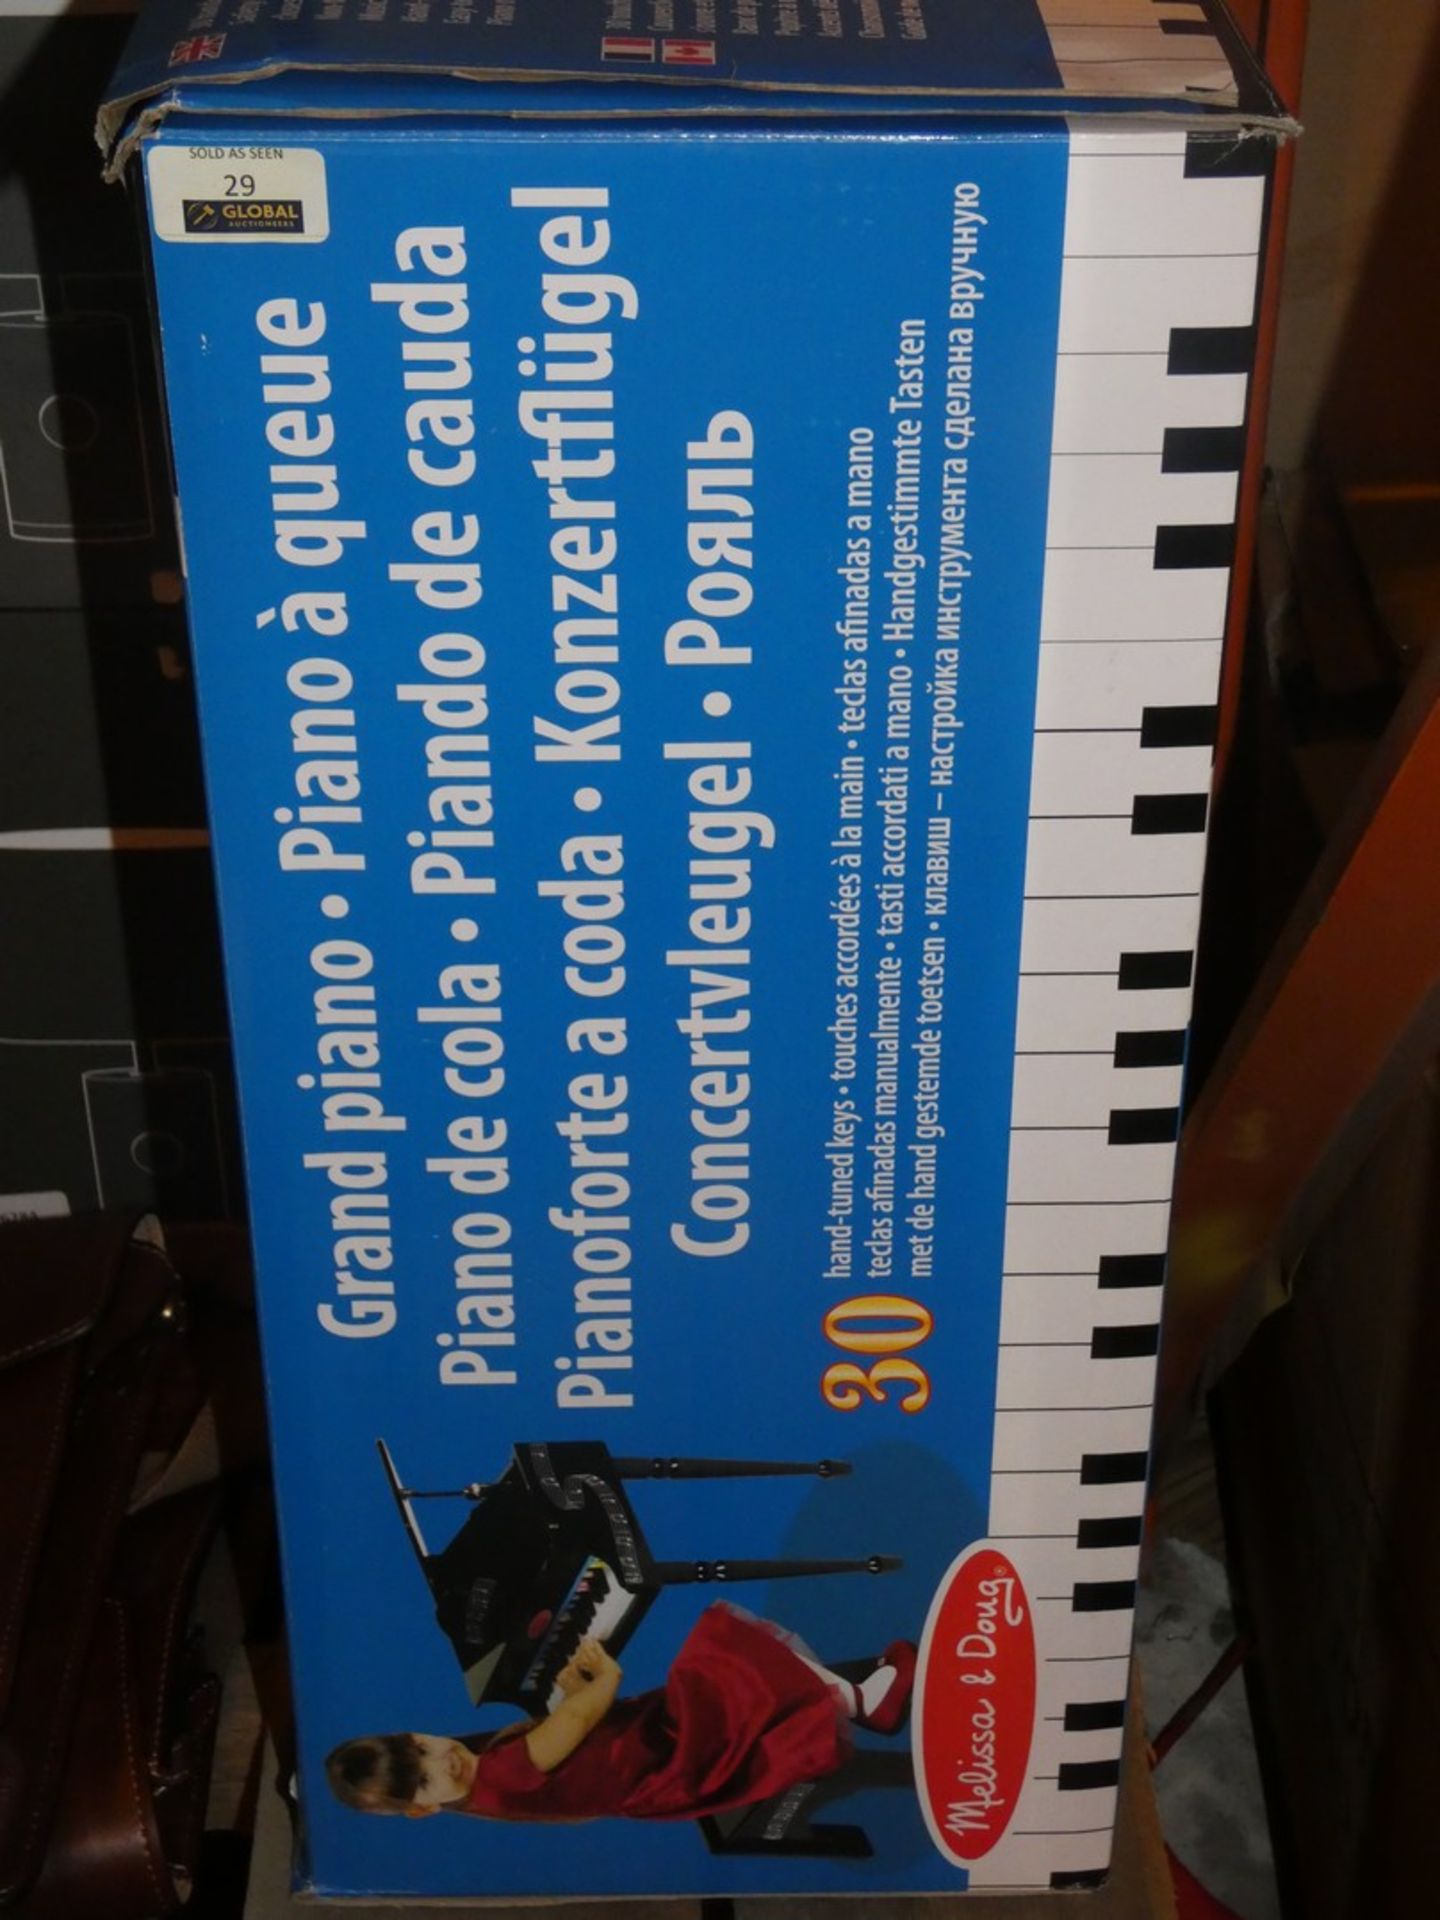 Childrens Grand Piano RRP £85 (11022017) (Viewings And Appraisals Are Highly Recommended)